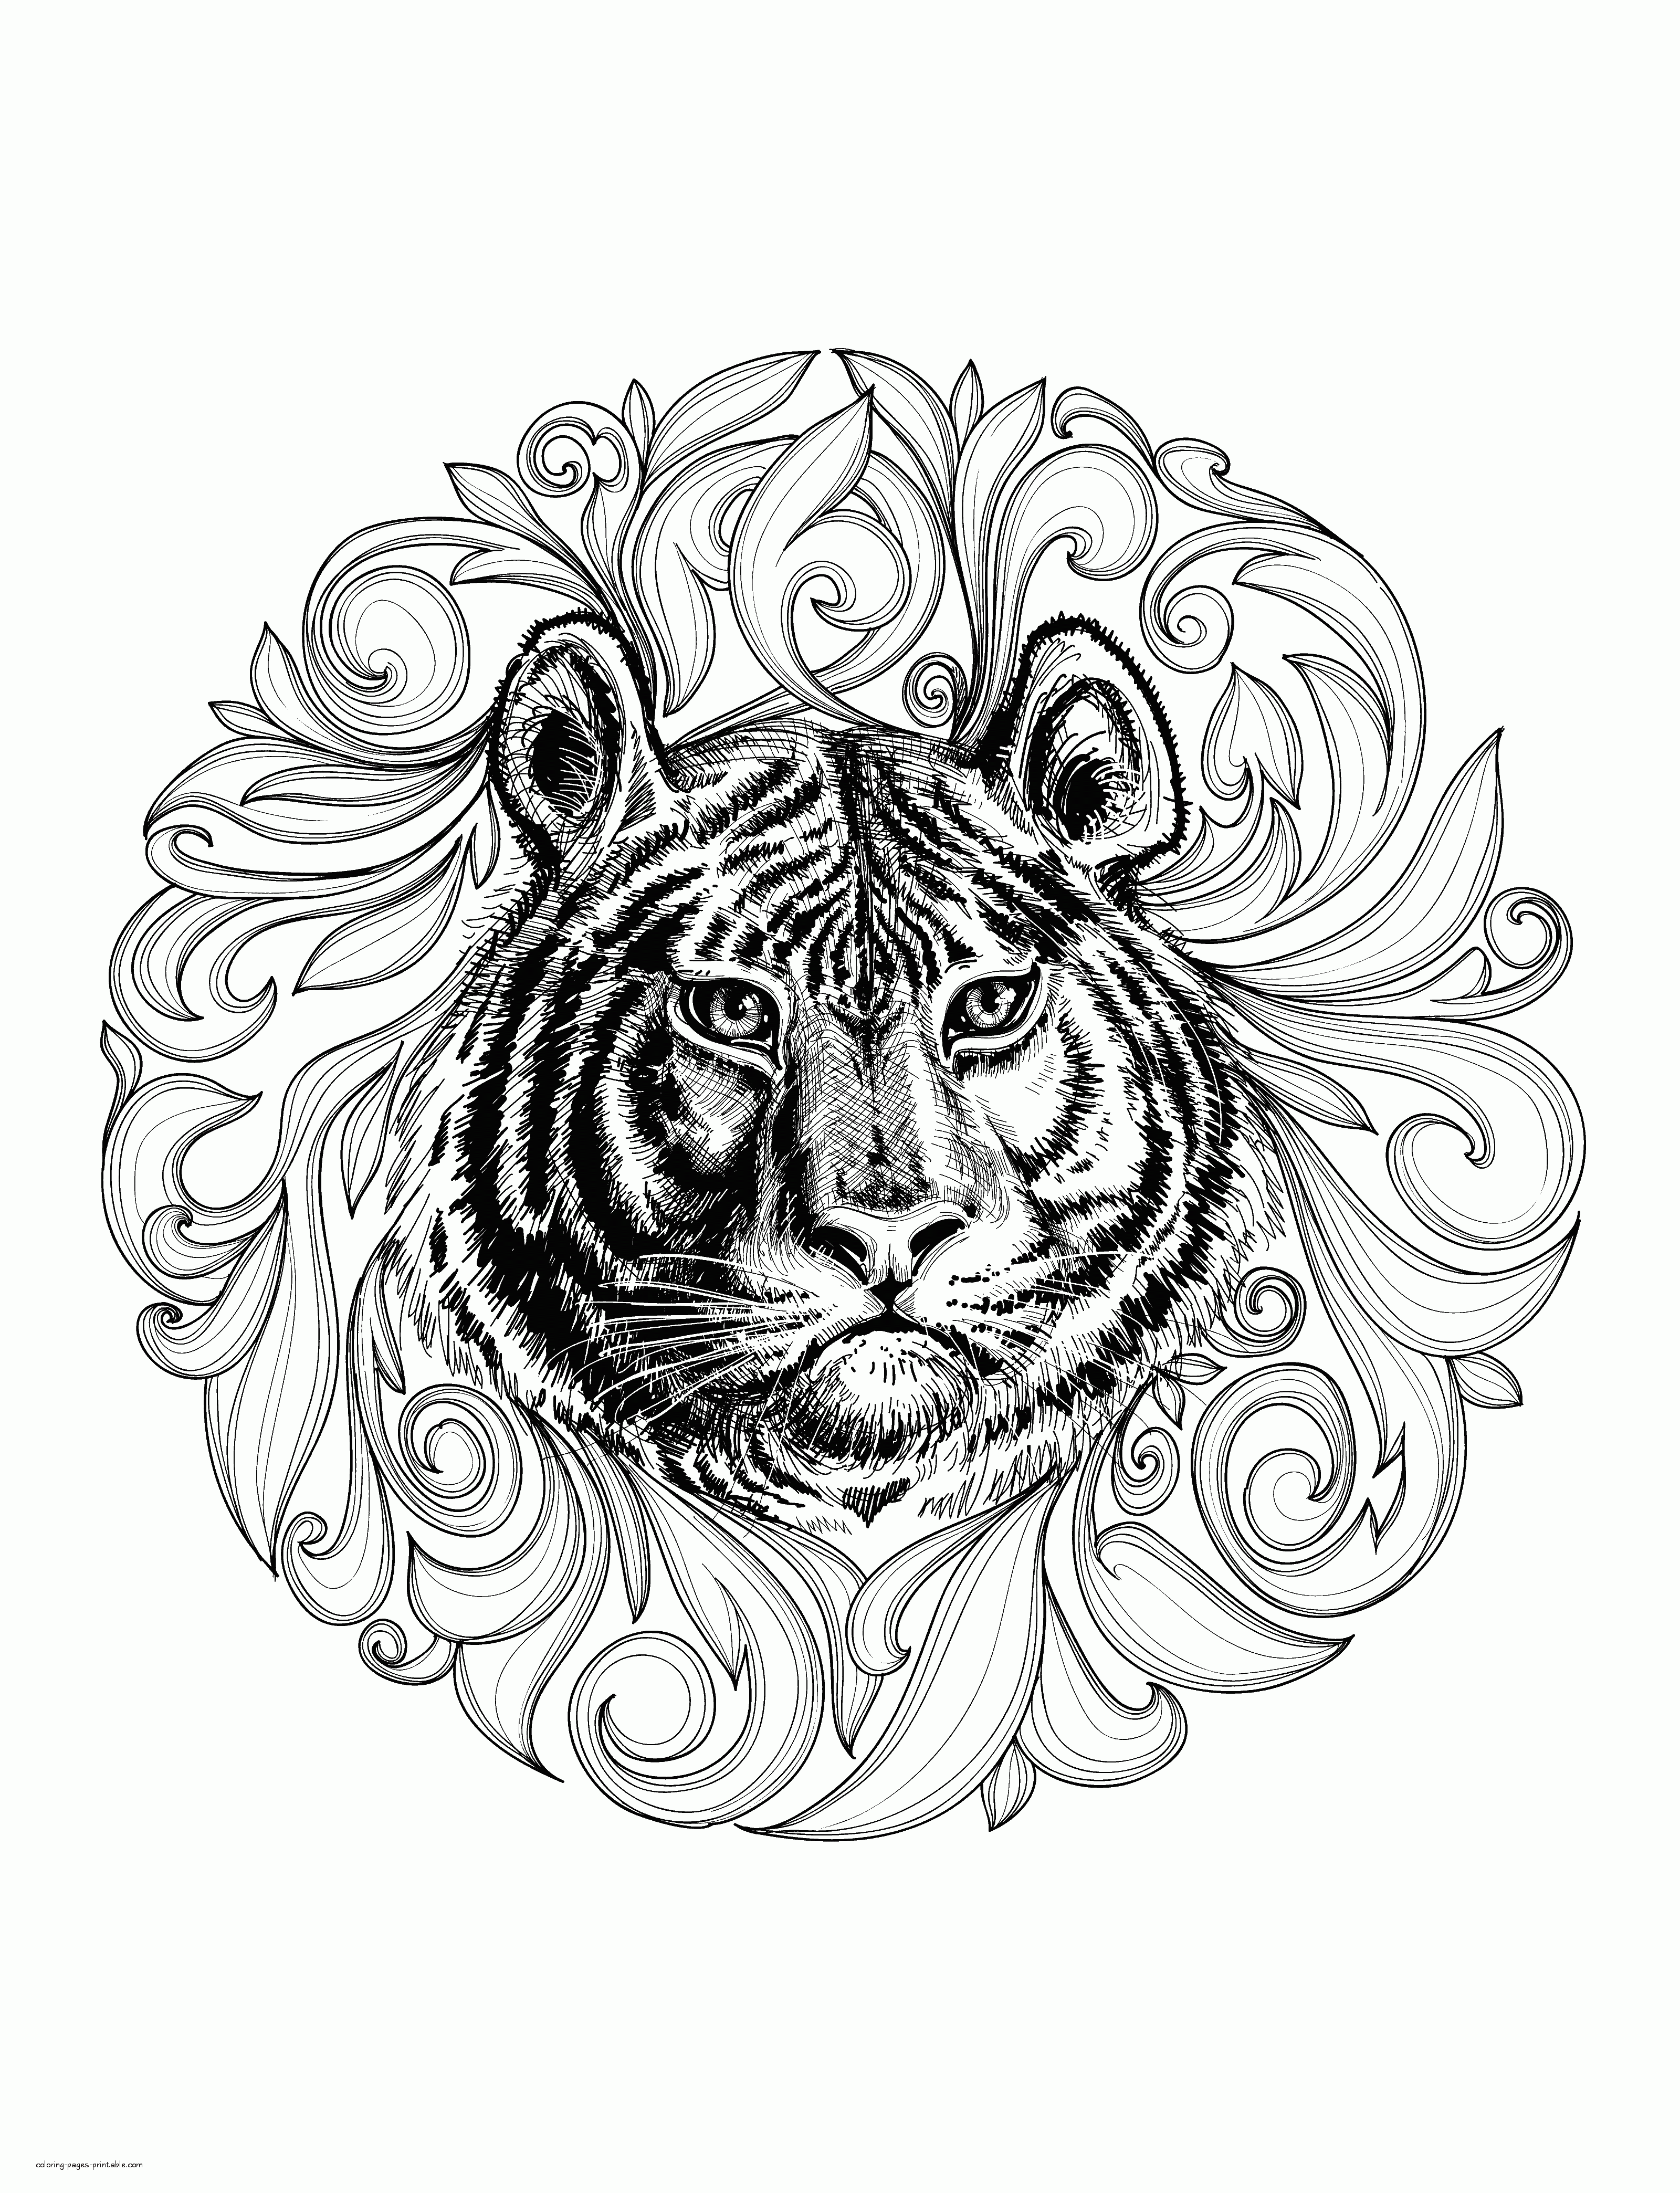 Animal coloring pages for adults realistic tiger coloring